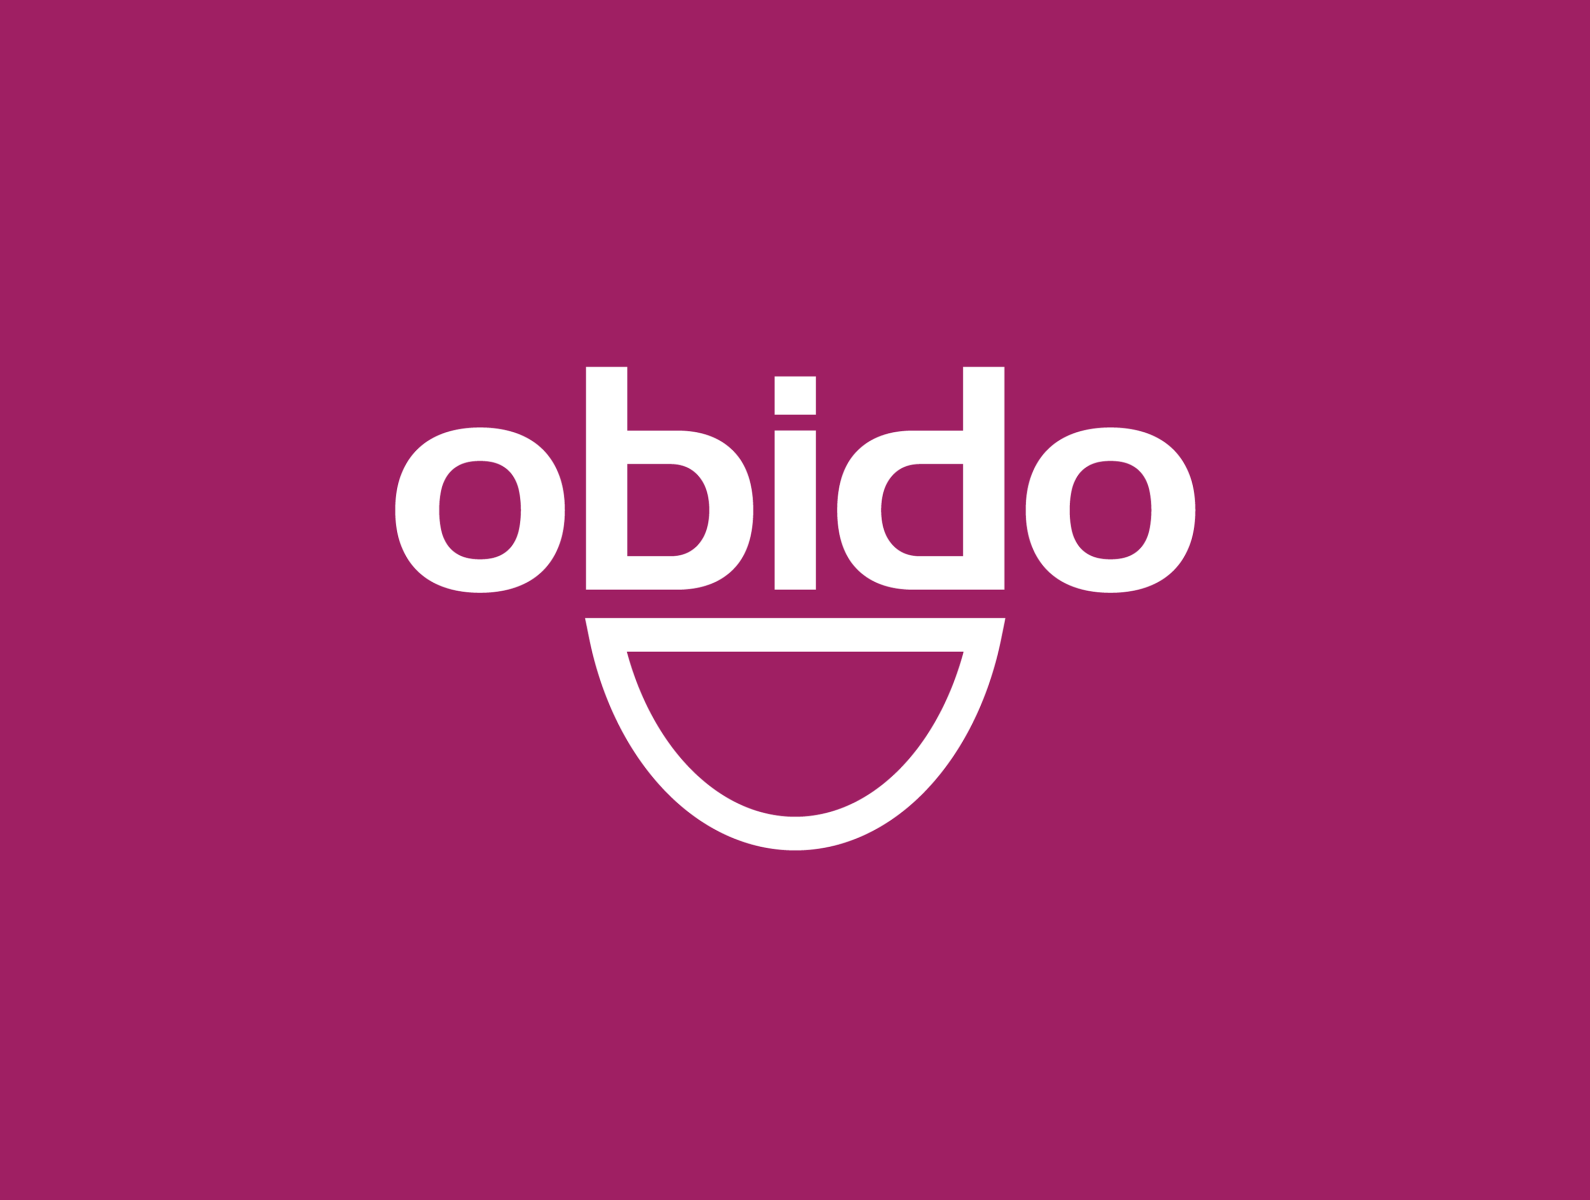 obido by Moustapha on Dribbble